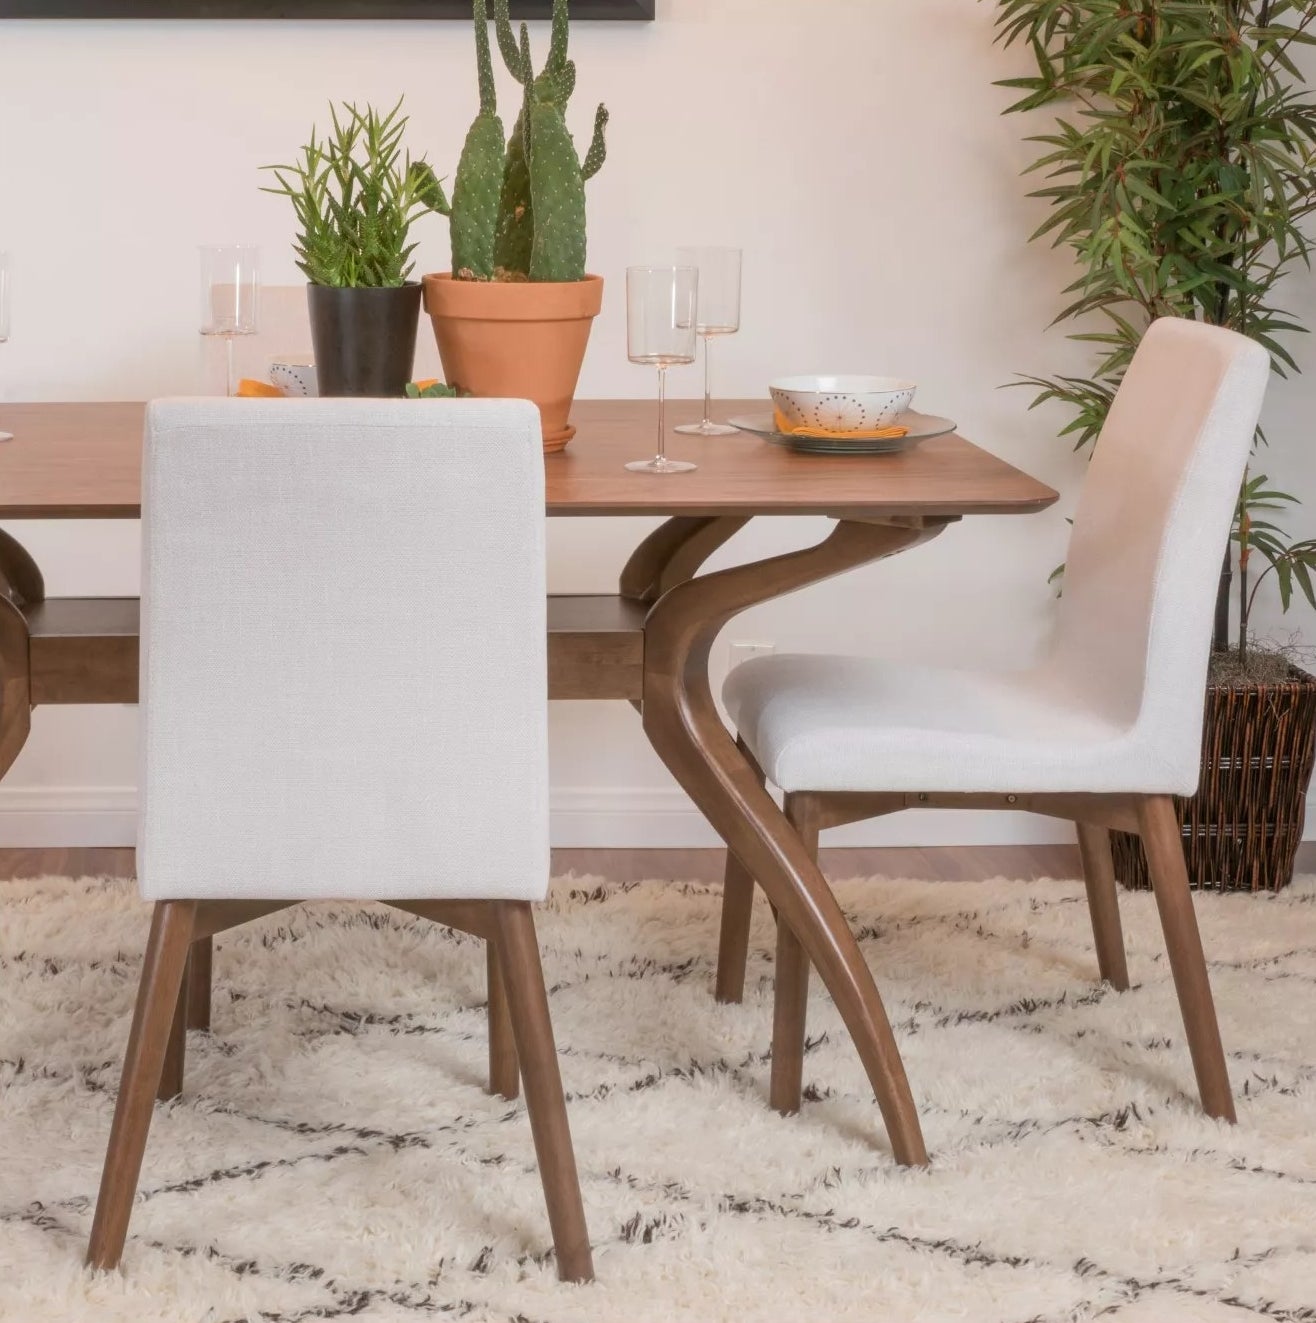 The dining chairs in beige